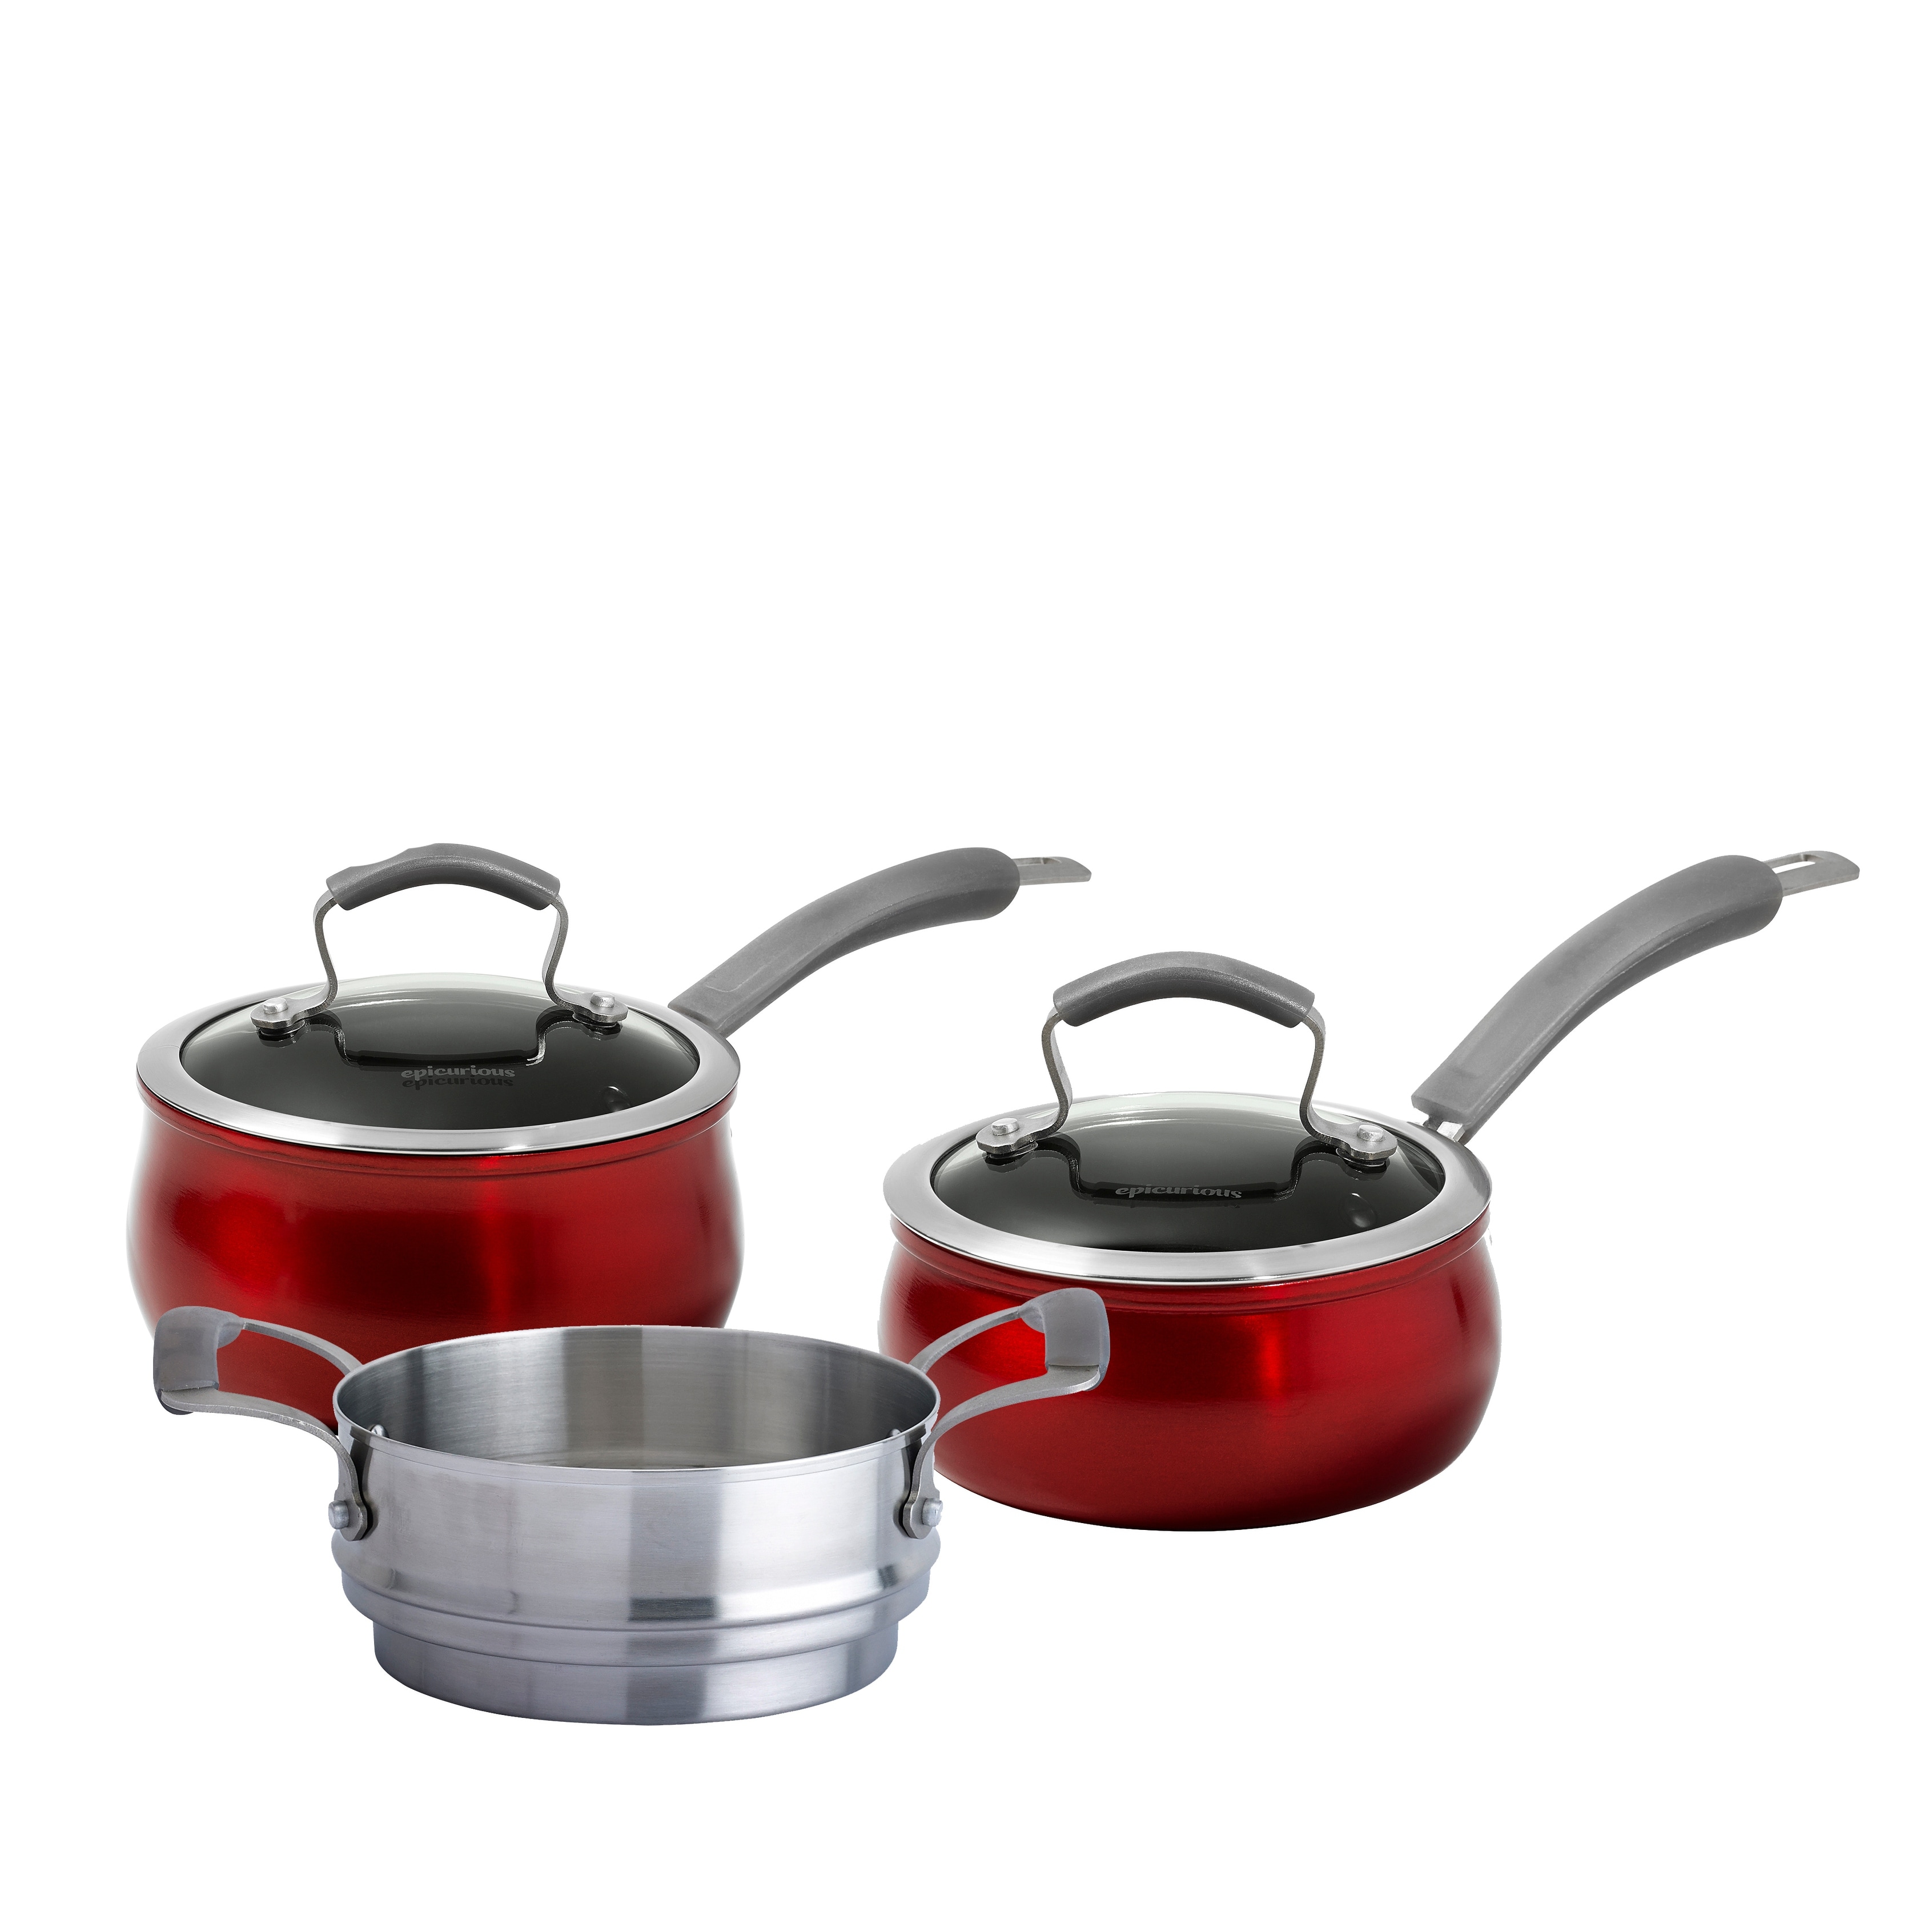 https://ak1.ostkcdn.com/images/products/is/images/direct/1480a3df77eced3b6b30e760b7e73b5b9485446e/Epicurious-11Pc-Aluminum-Cookware-Set-Red.jpg